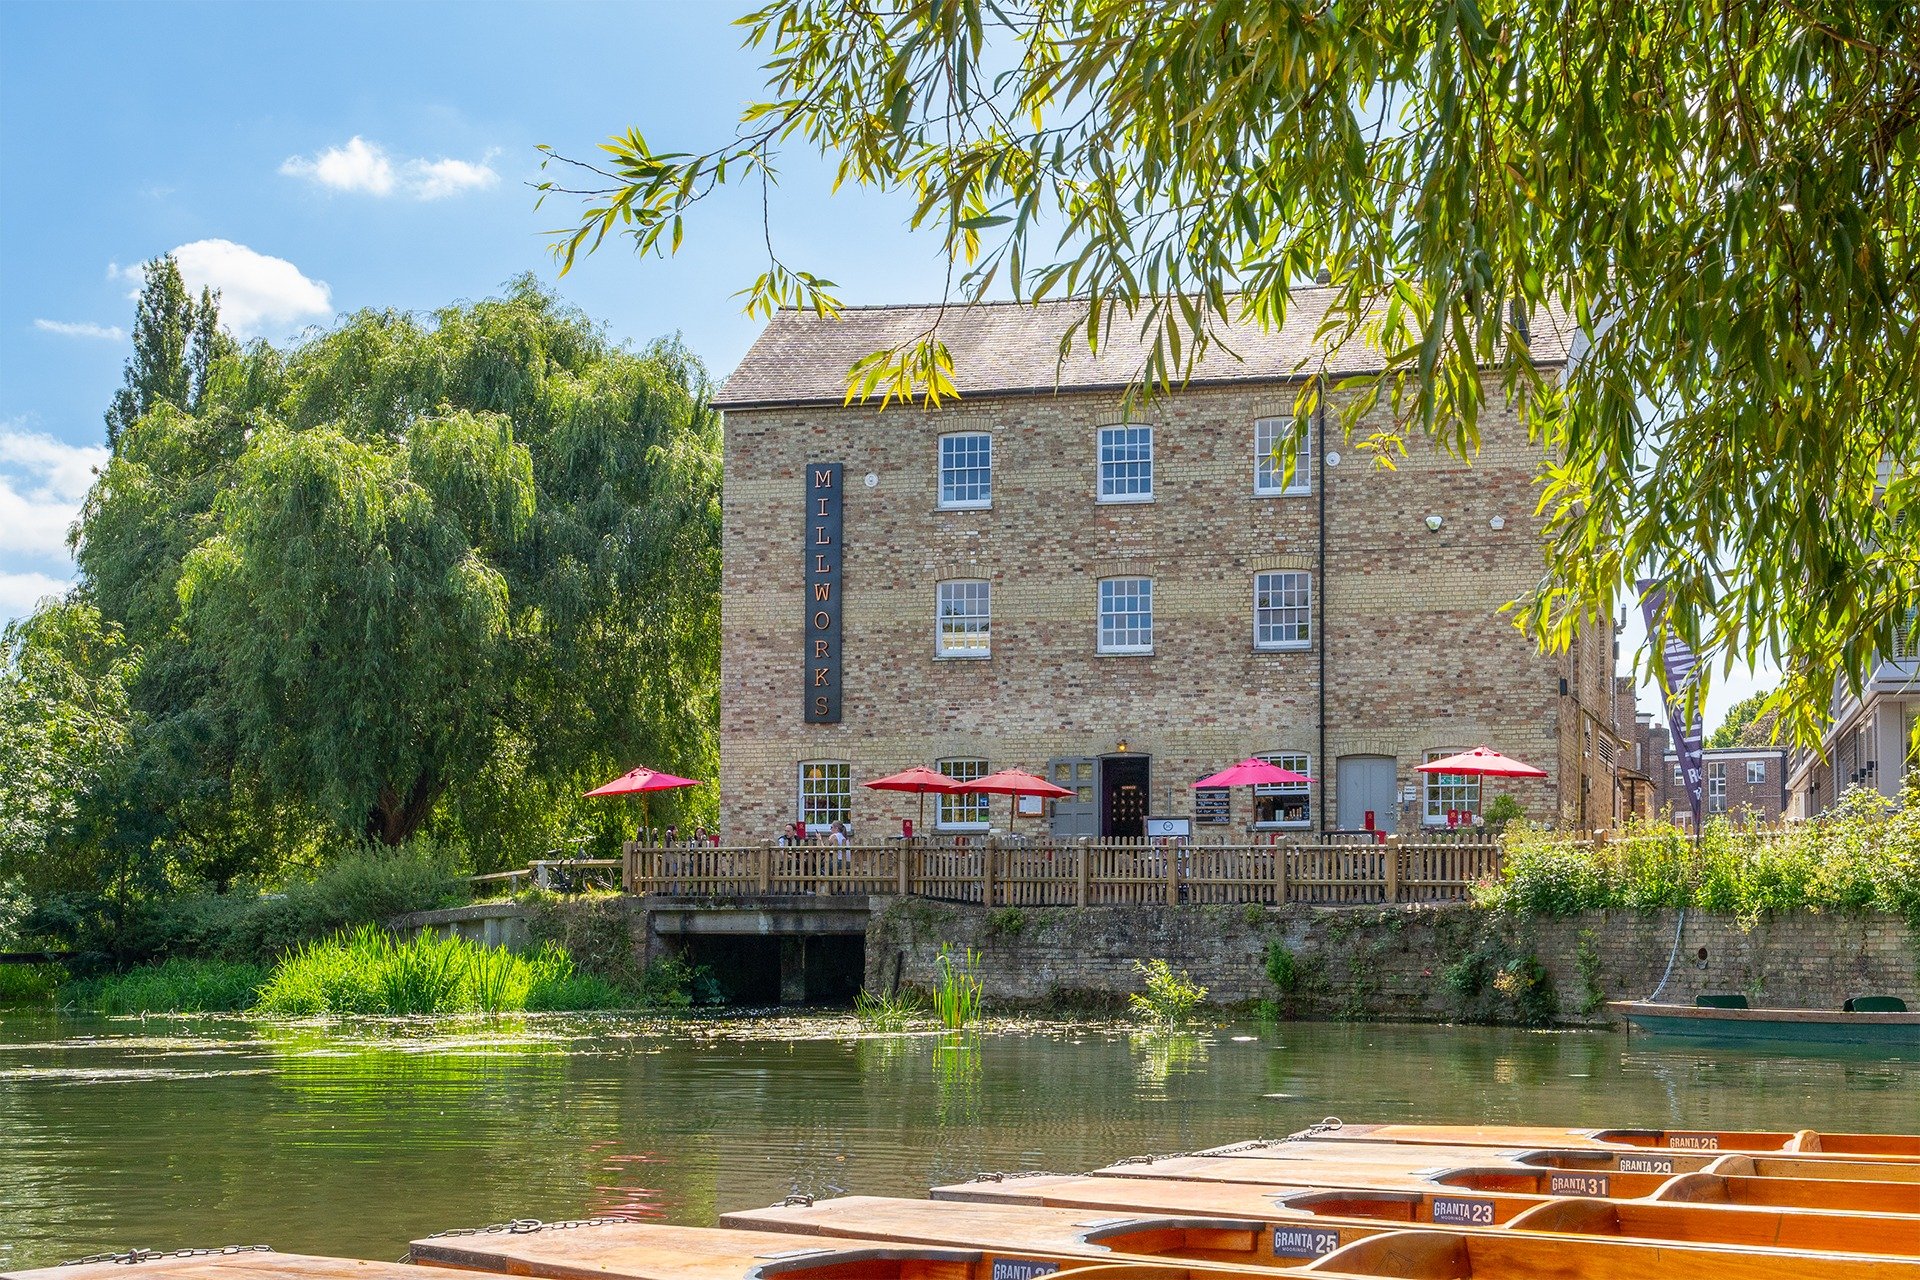 We know just the spot...

Our Millpond location makes Millworks ideal for lunch in the sun, followed by an ice cream from our hatch to stroll across the meadows into town. Weekend plans = sorted🍦☀️

#millworks #millpondcambridge #springdays